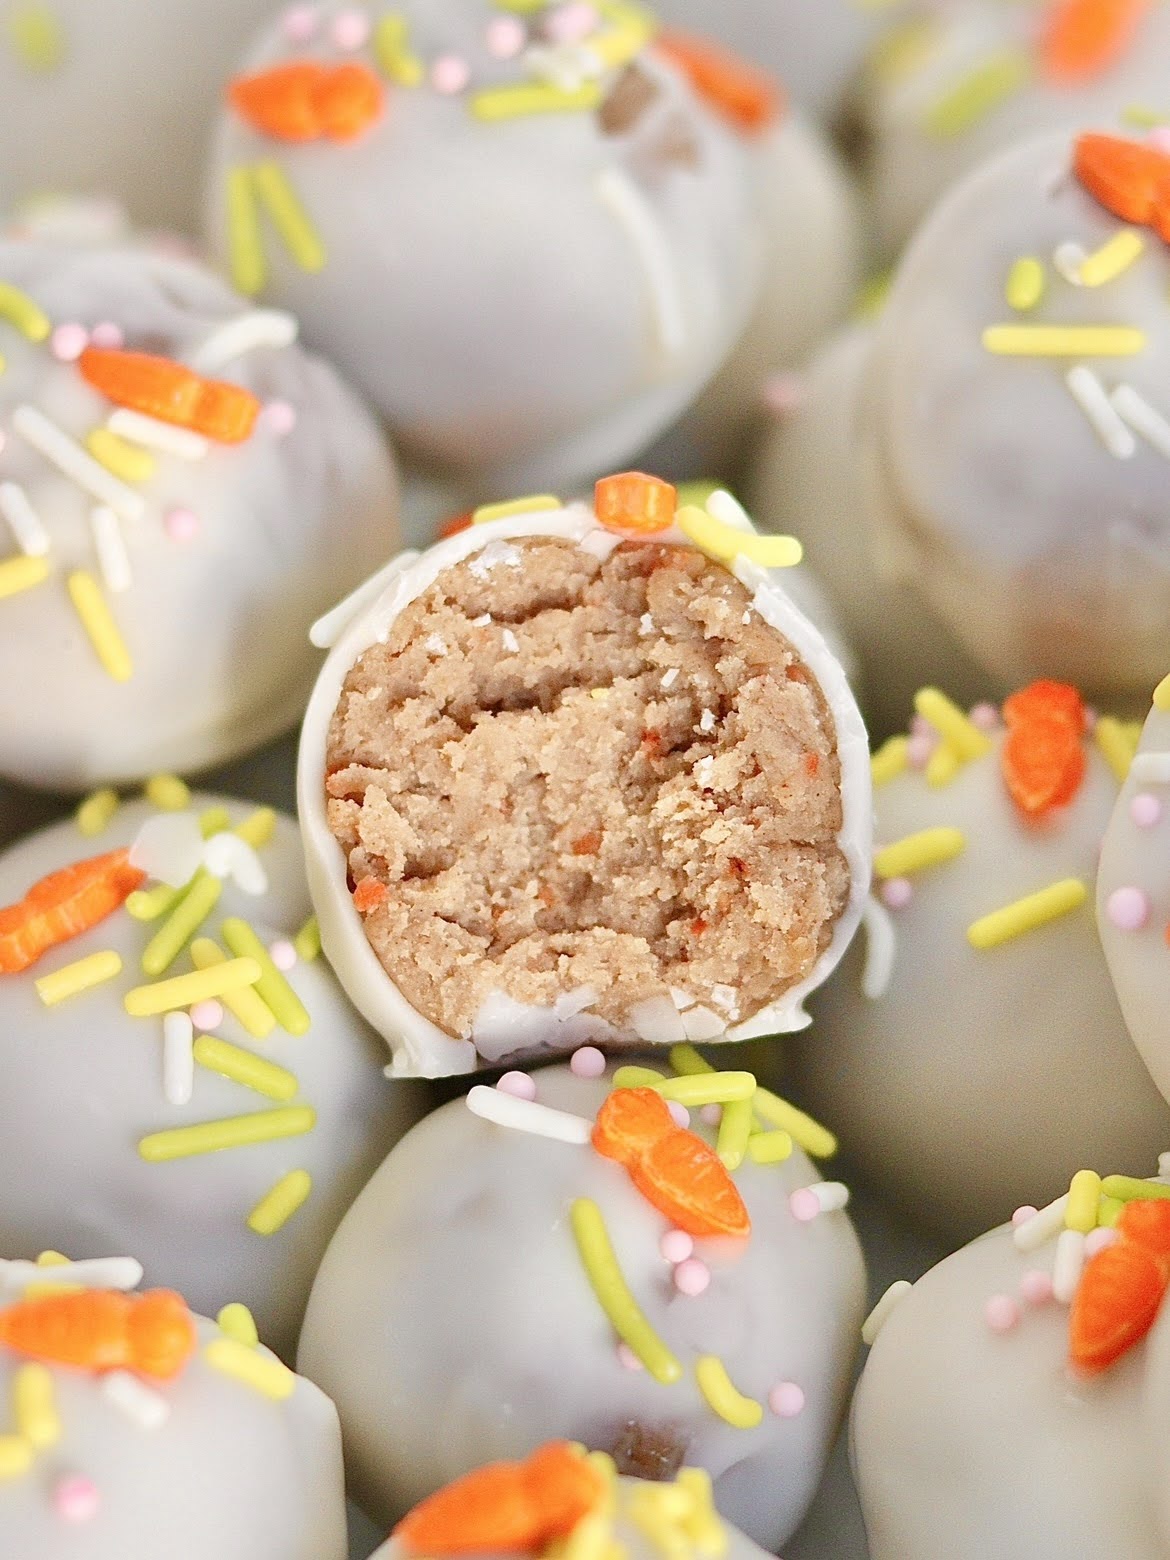 A carrot cake truffle with a bite taken out of it.